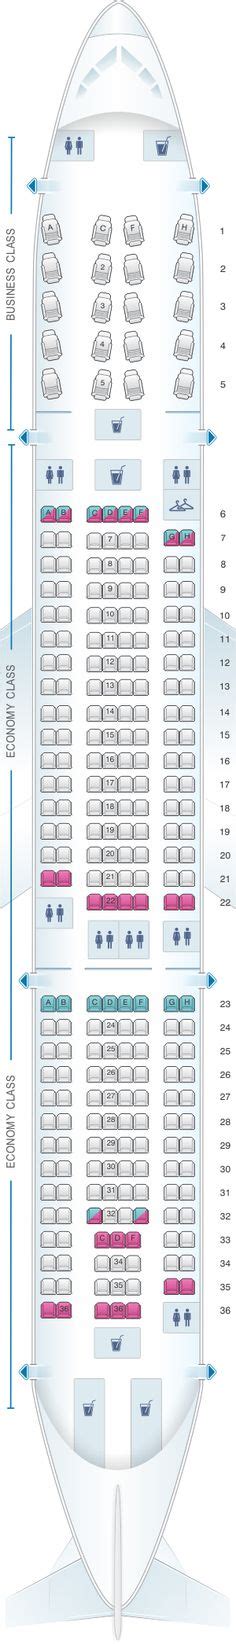 Seat Map Lufthansa Airbus A350 900 Config2 China Eastern Airlines